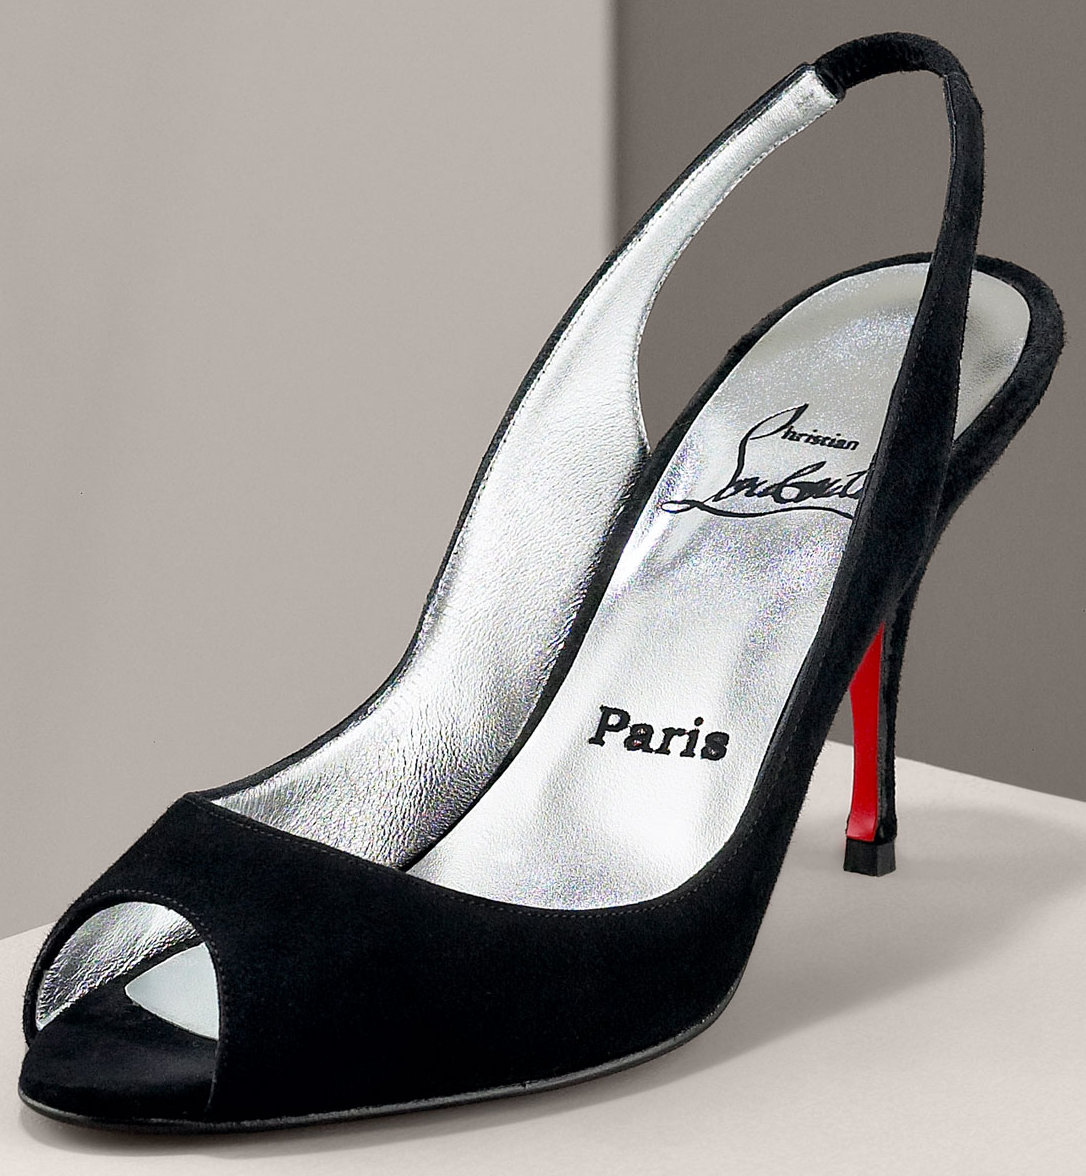 Christian Louboutin Loses a Round in the Legal Battle Over Red